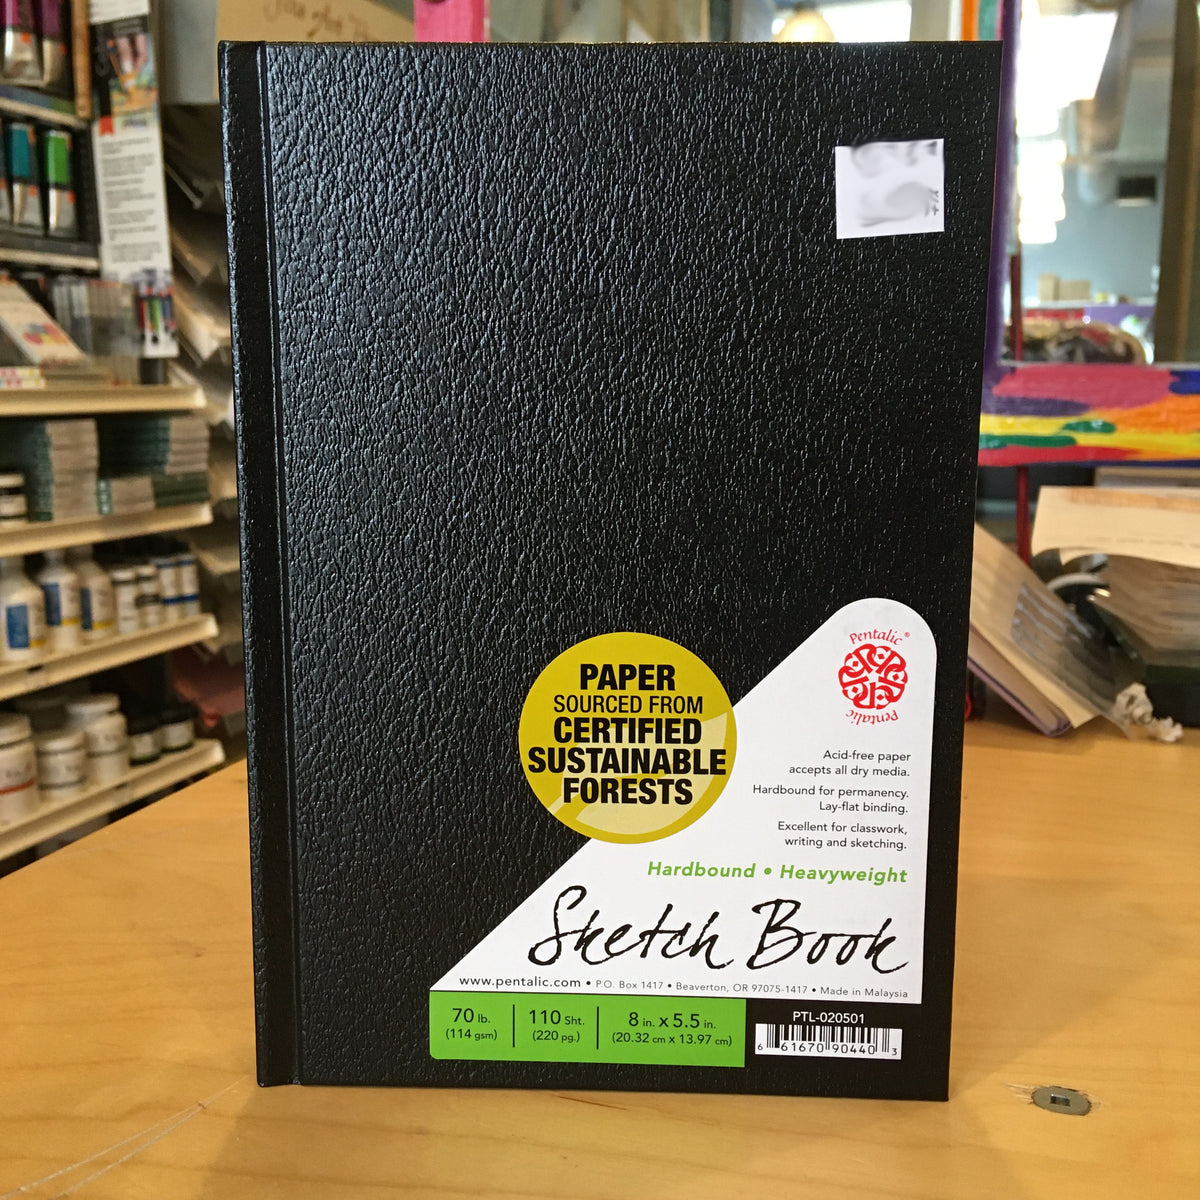 Pentalic Sketch Book Hardbound Unboxing and Review by WISE MAN